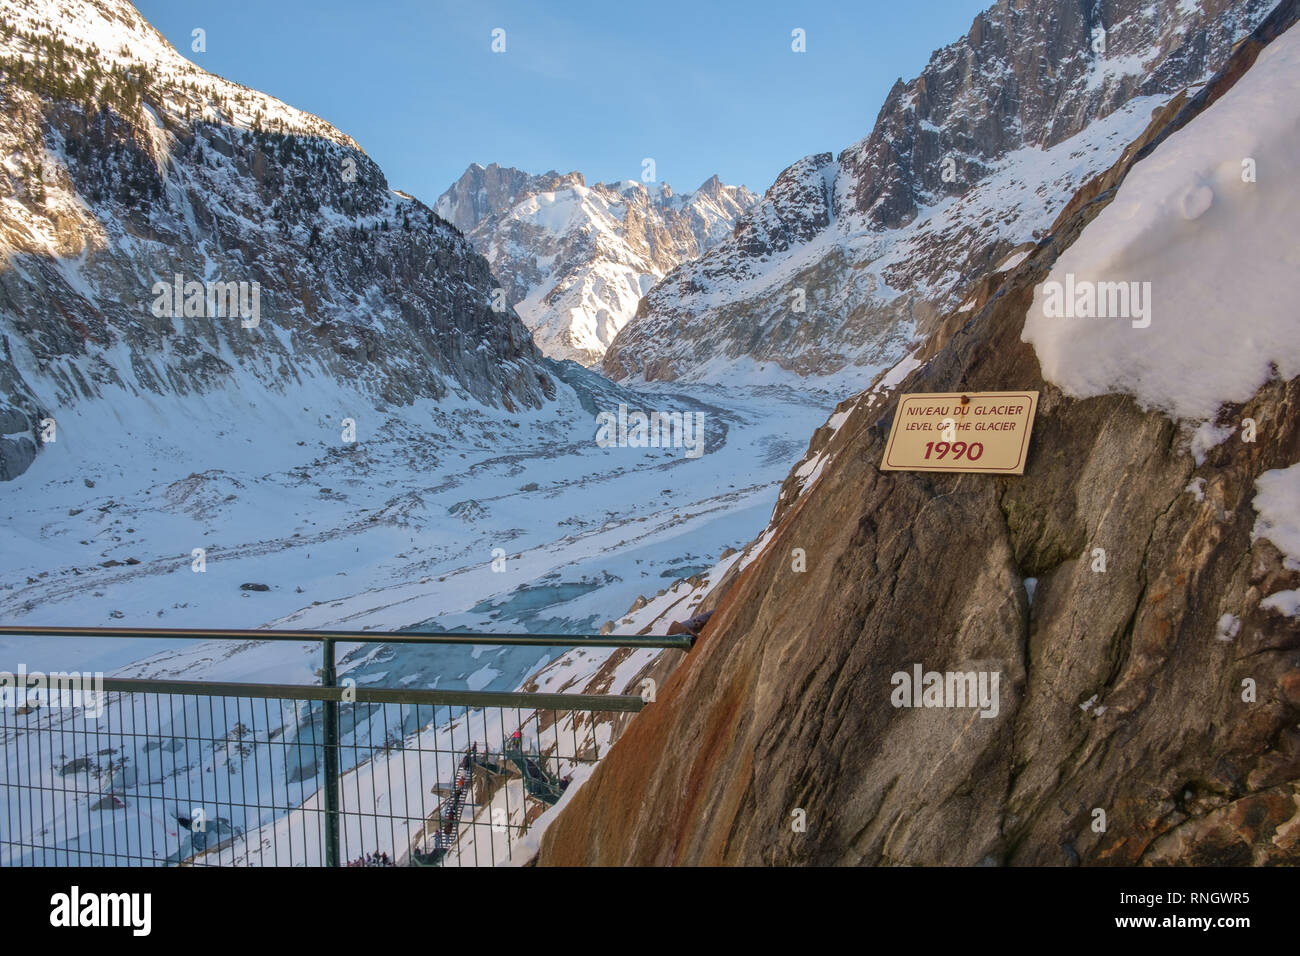 The Mer de Glace Glacier, Montenvers, Chamonix, France. Climate change and global warming illustrated by the sign showing the ice level in 1990. Stock Photo